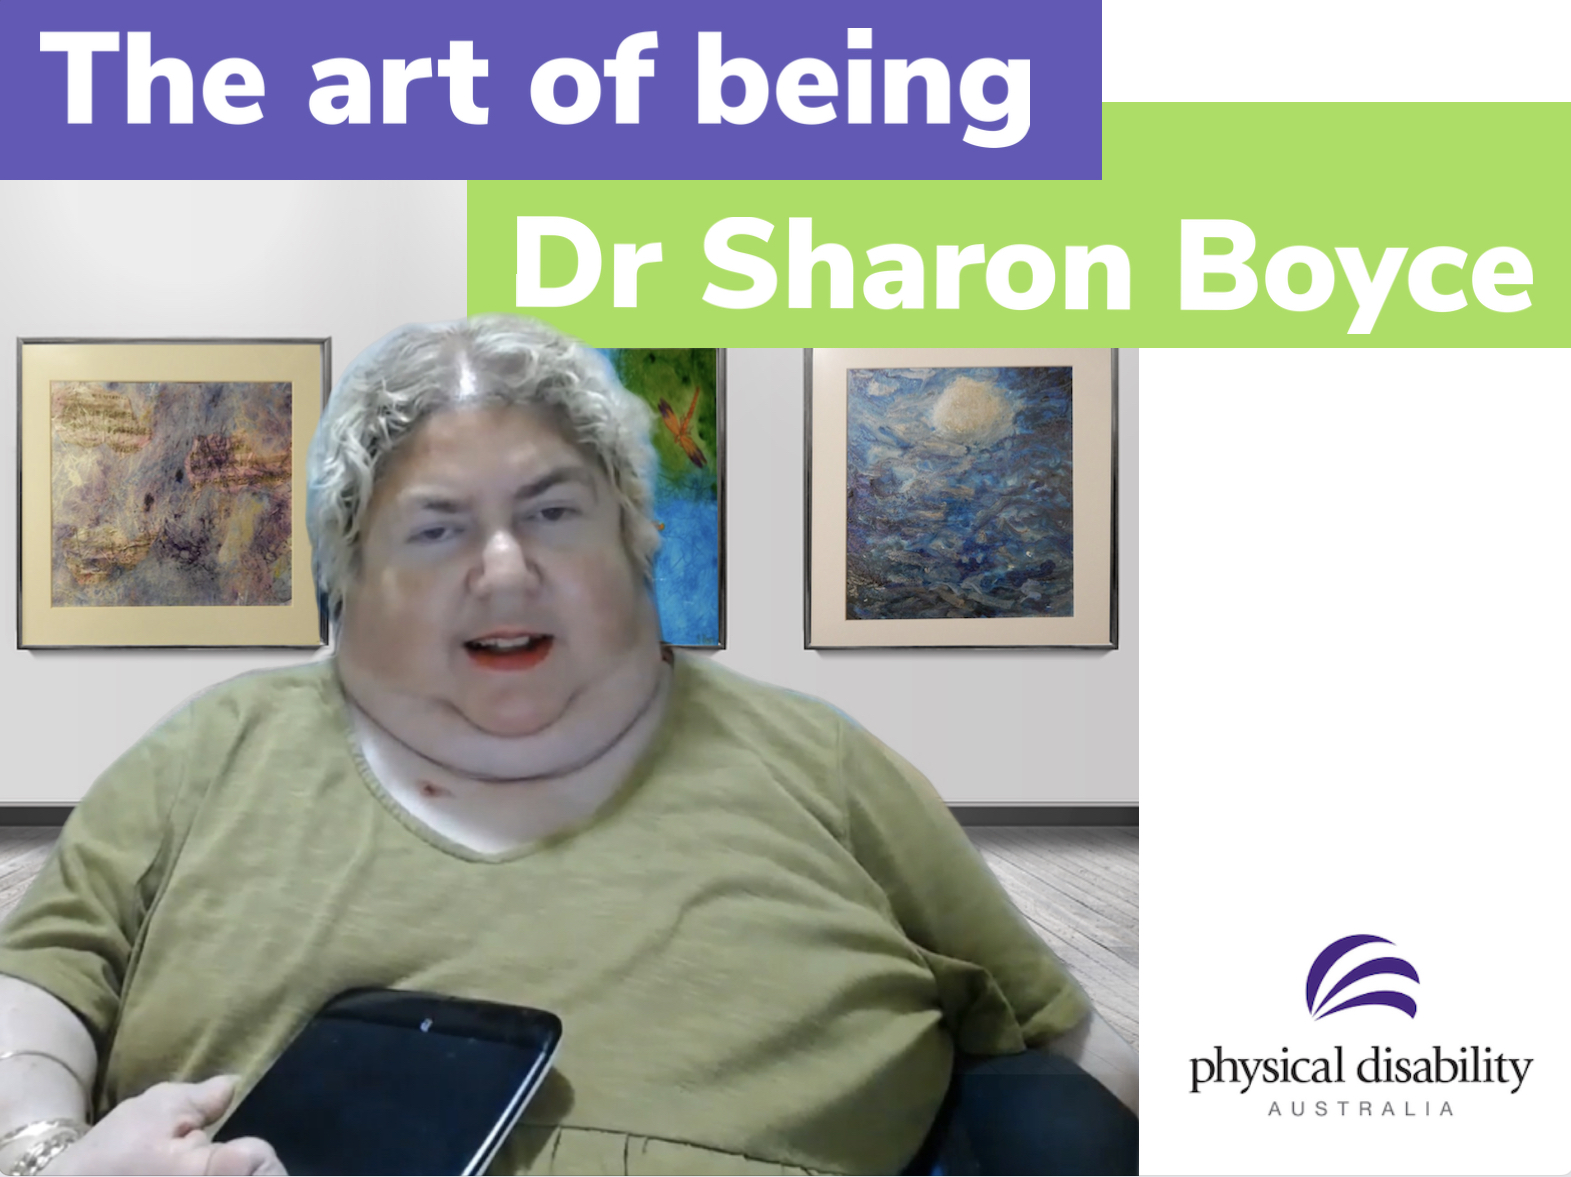 The Voice of Boyce – “Exploring Art” with Dr Sharon Boyce